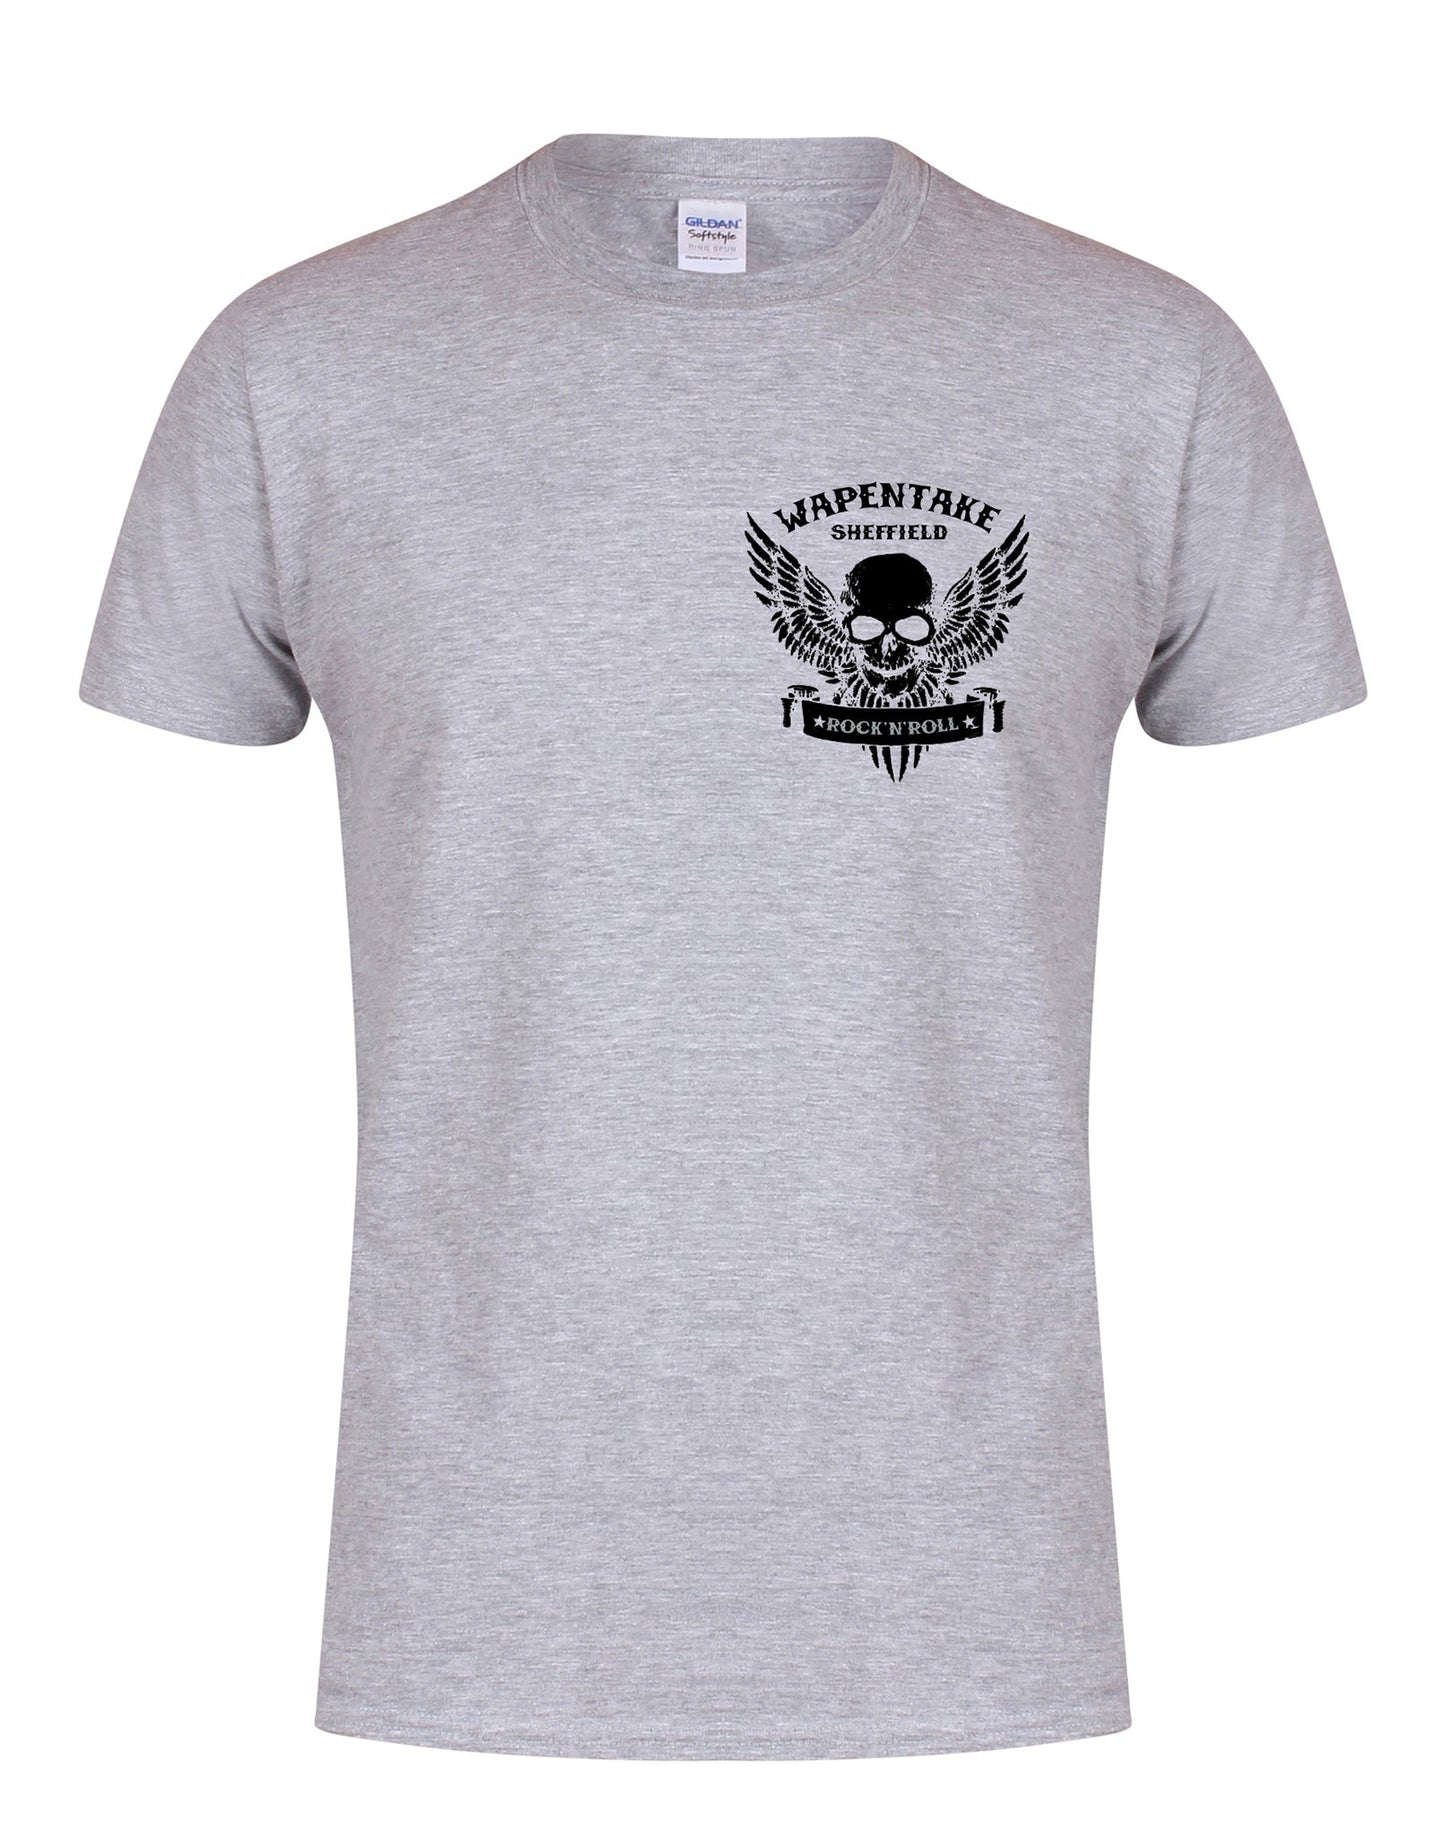 Wapentake small skull/wings unisex fit T-shirt - various colours - Dirty Stop Outs